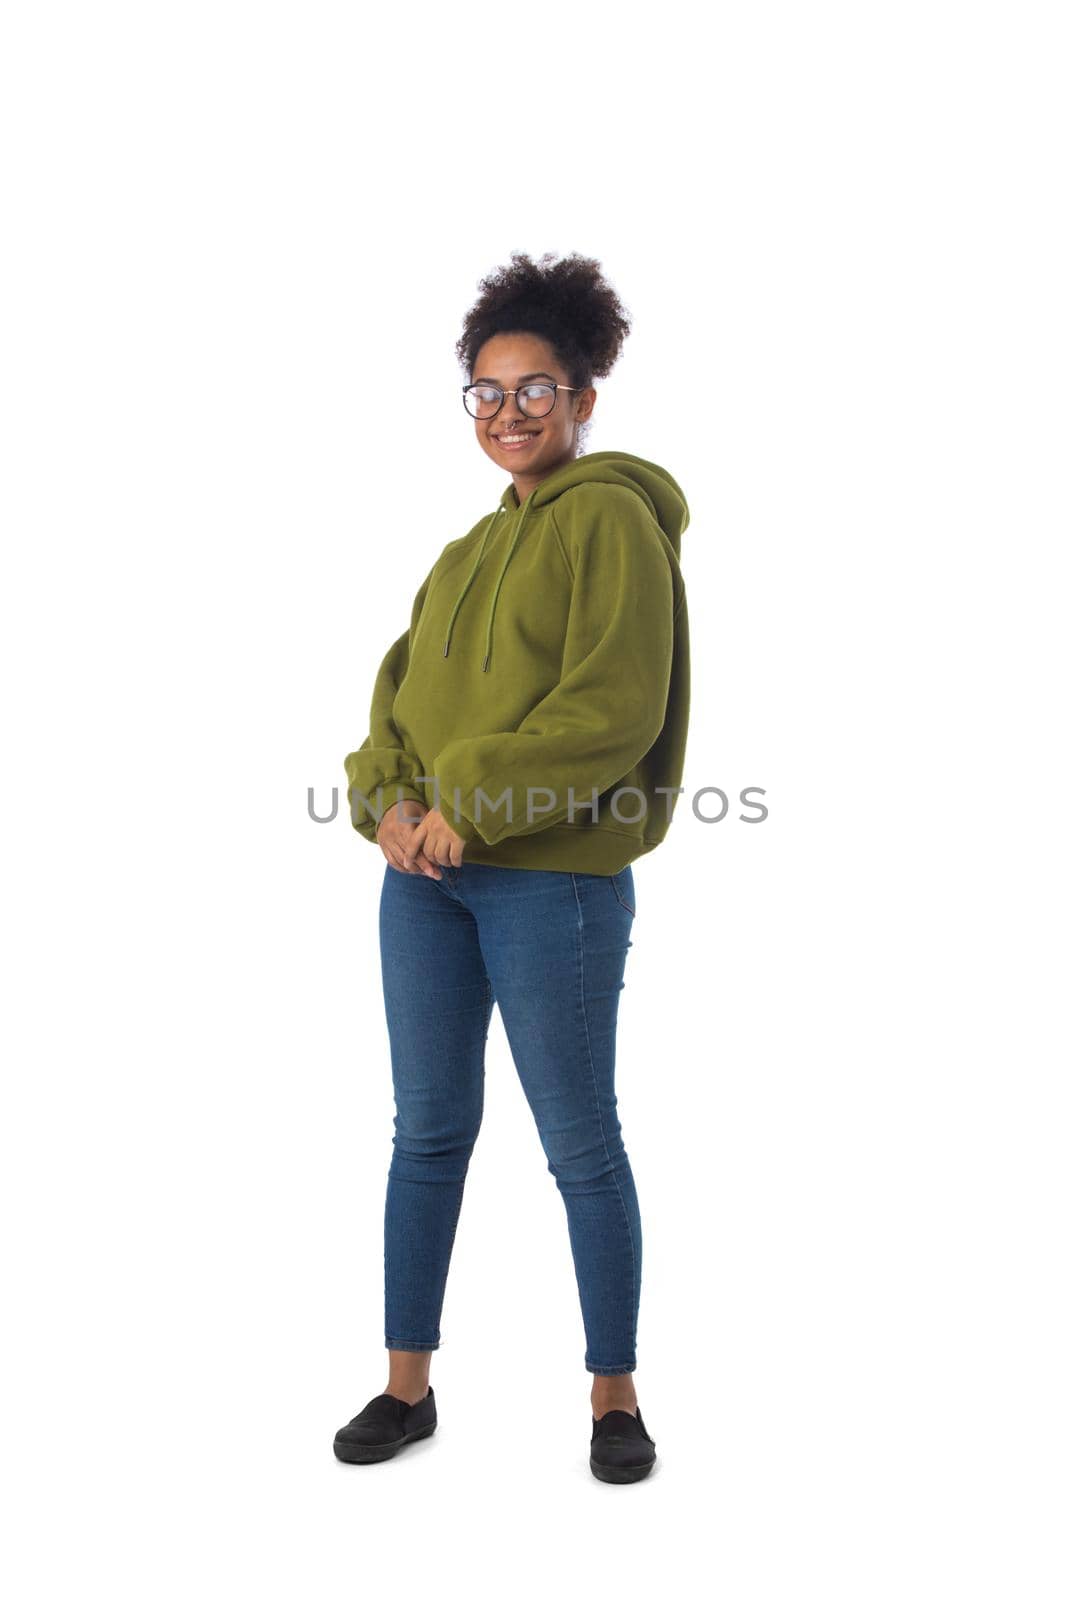 Black woman wearing casual clothes by ALotOfPeople